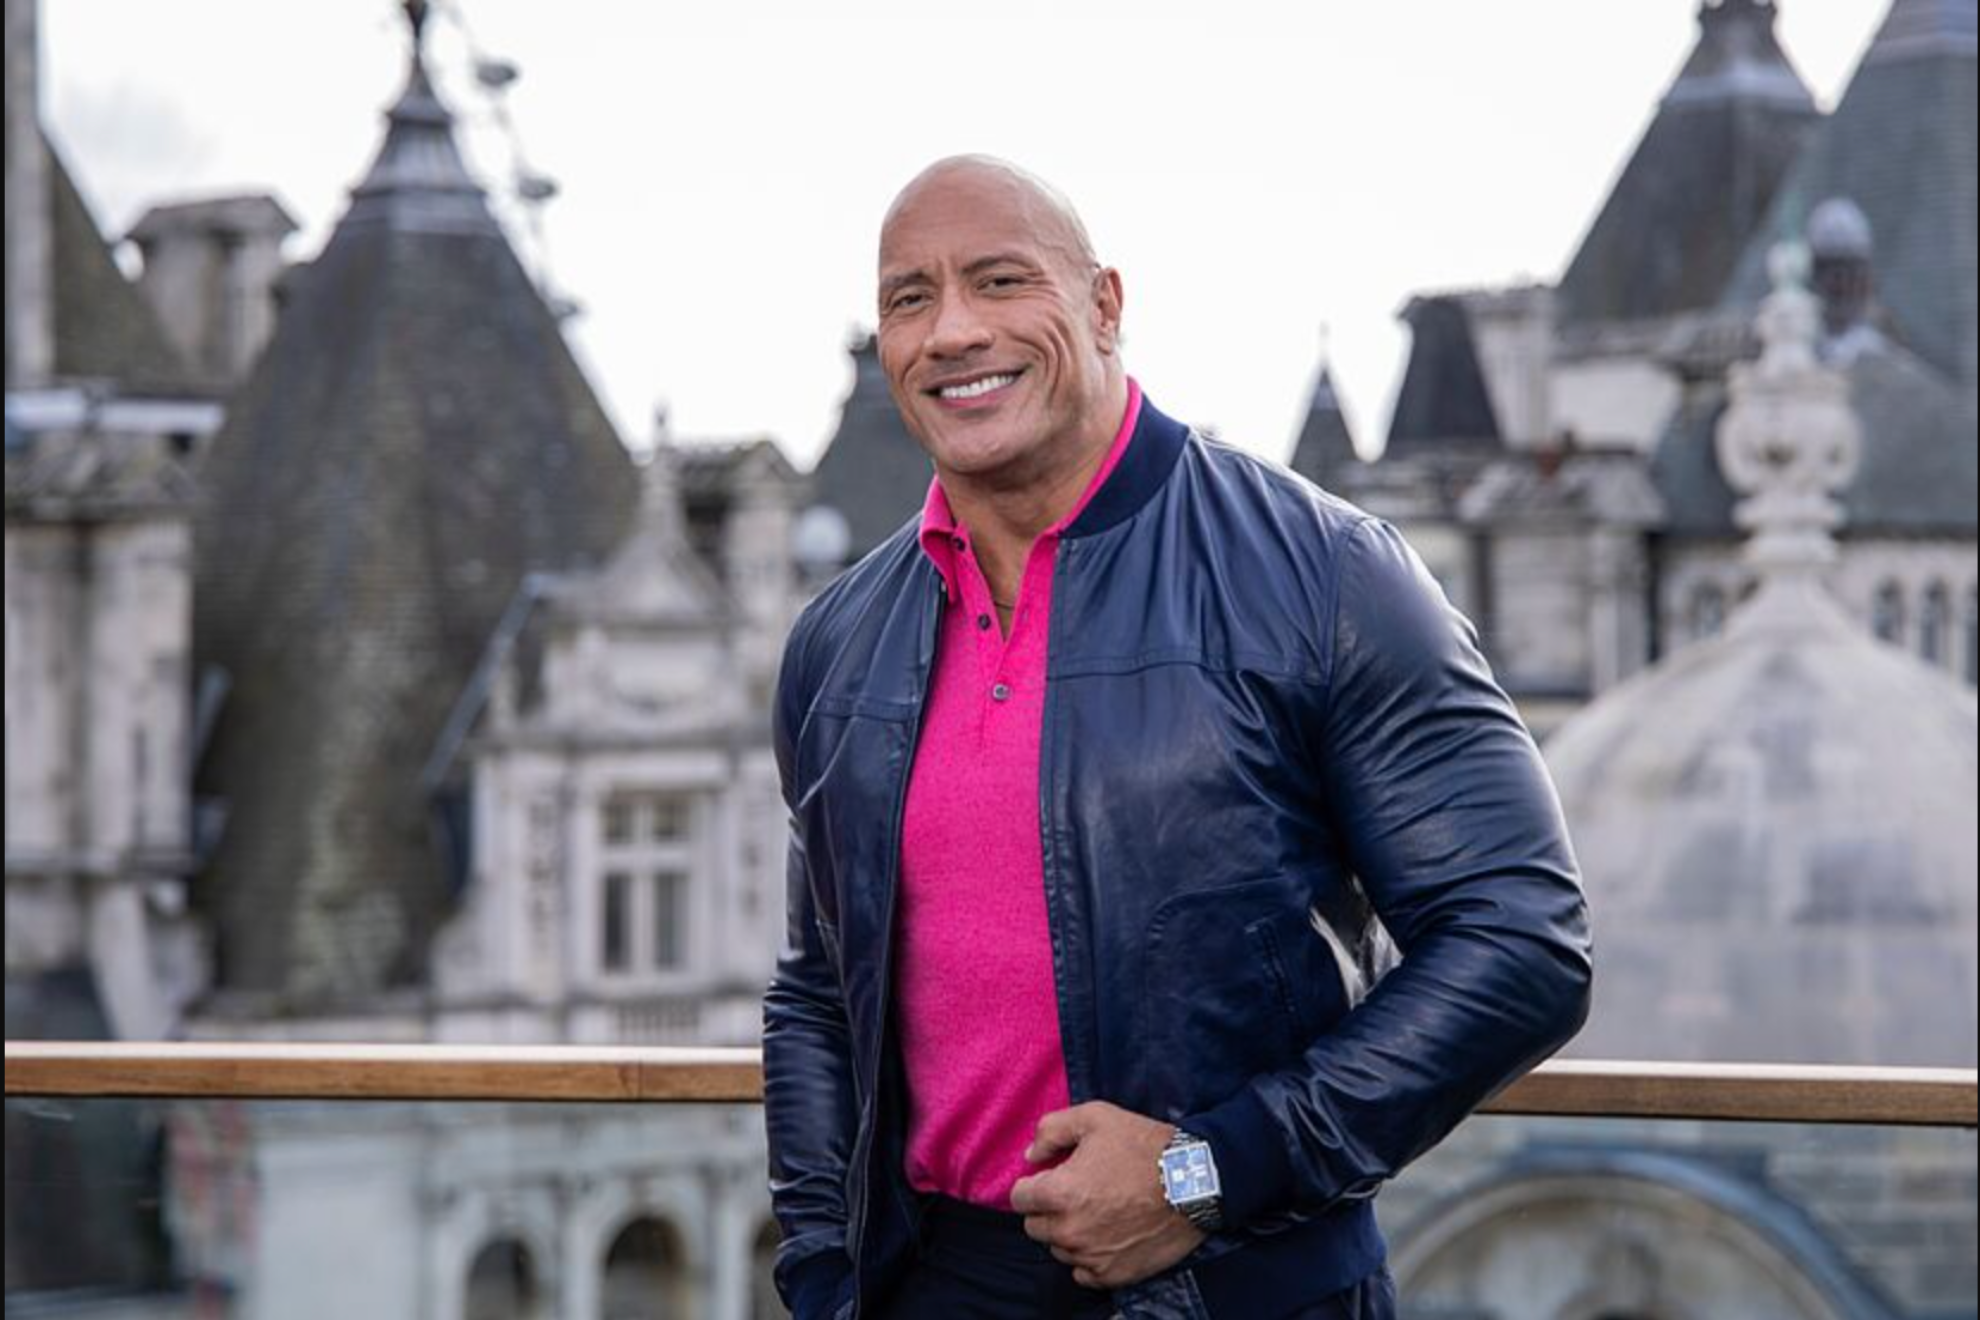 You will always be The Rock's b*tch: Dwayne Johnson Absolutely